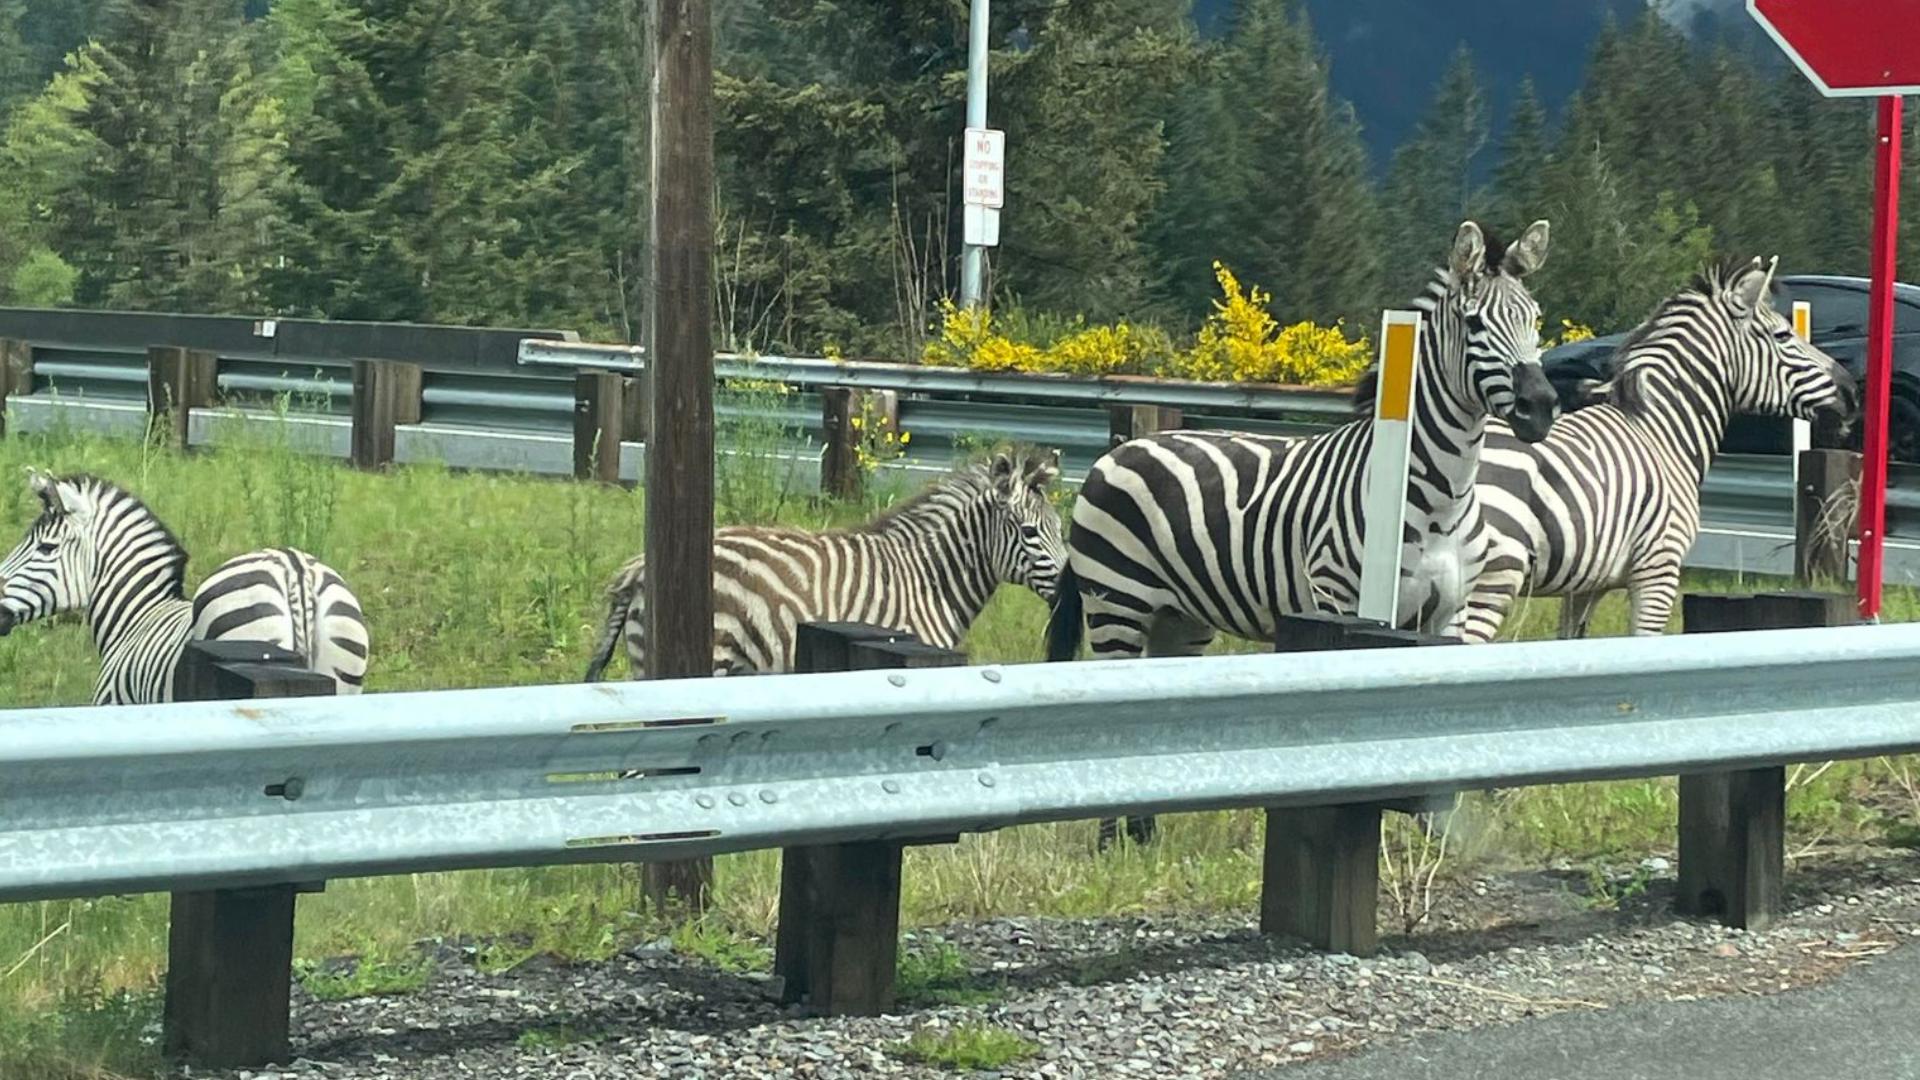 The four zebras escaped a trailer at about 1 p.m.